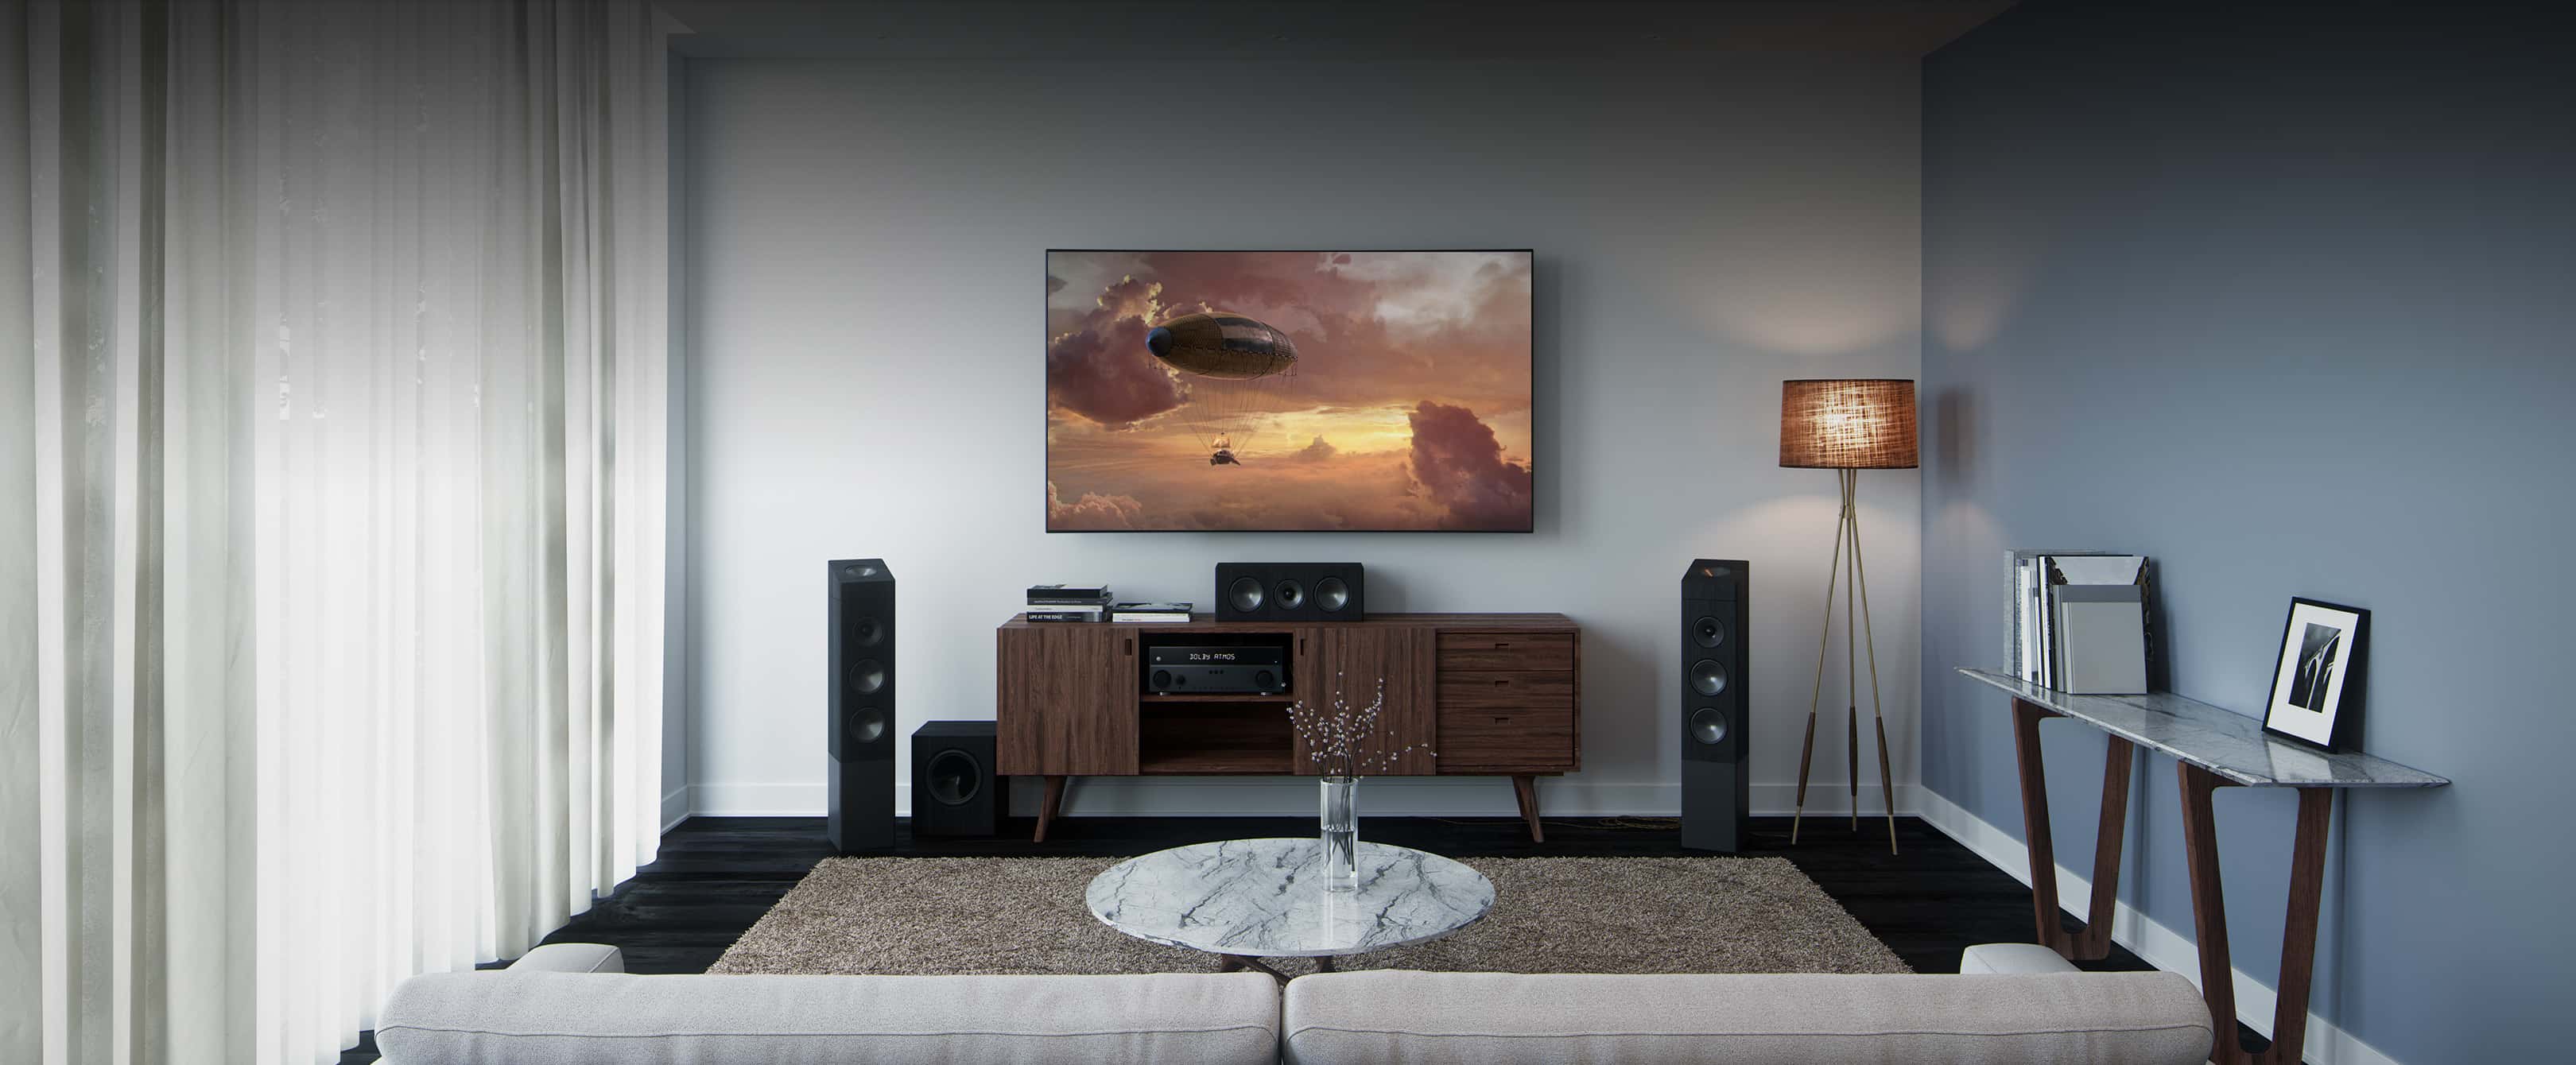 What Is Dolby Atmos Immersive Surround Sound?  Home theater setup, New home  theatre, Home cinema room